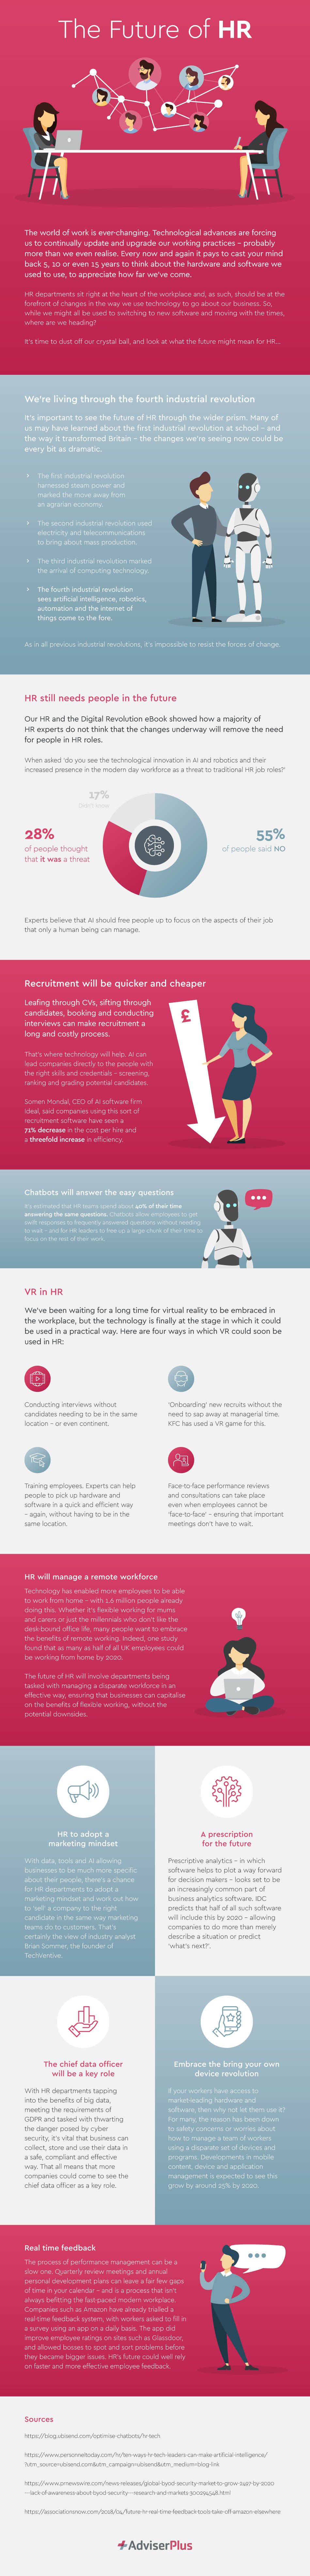 Future of HR infographic